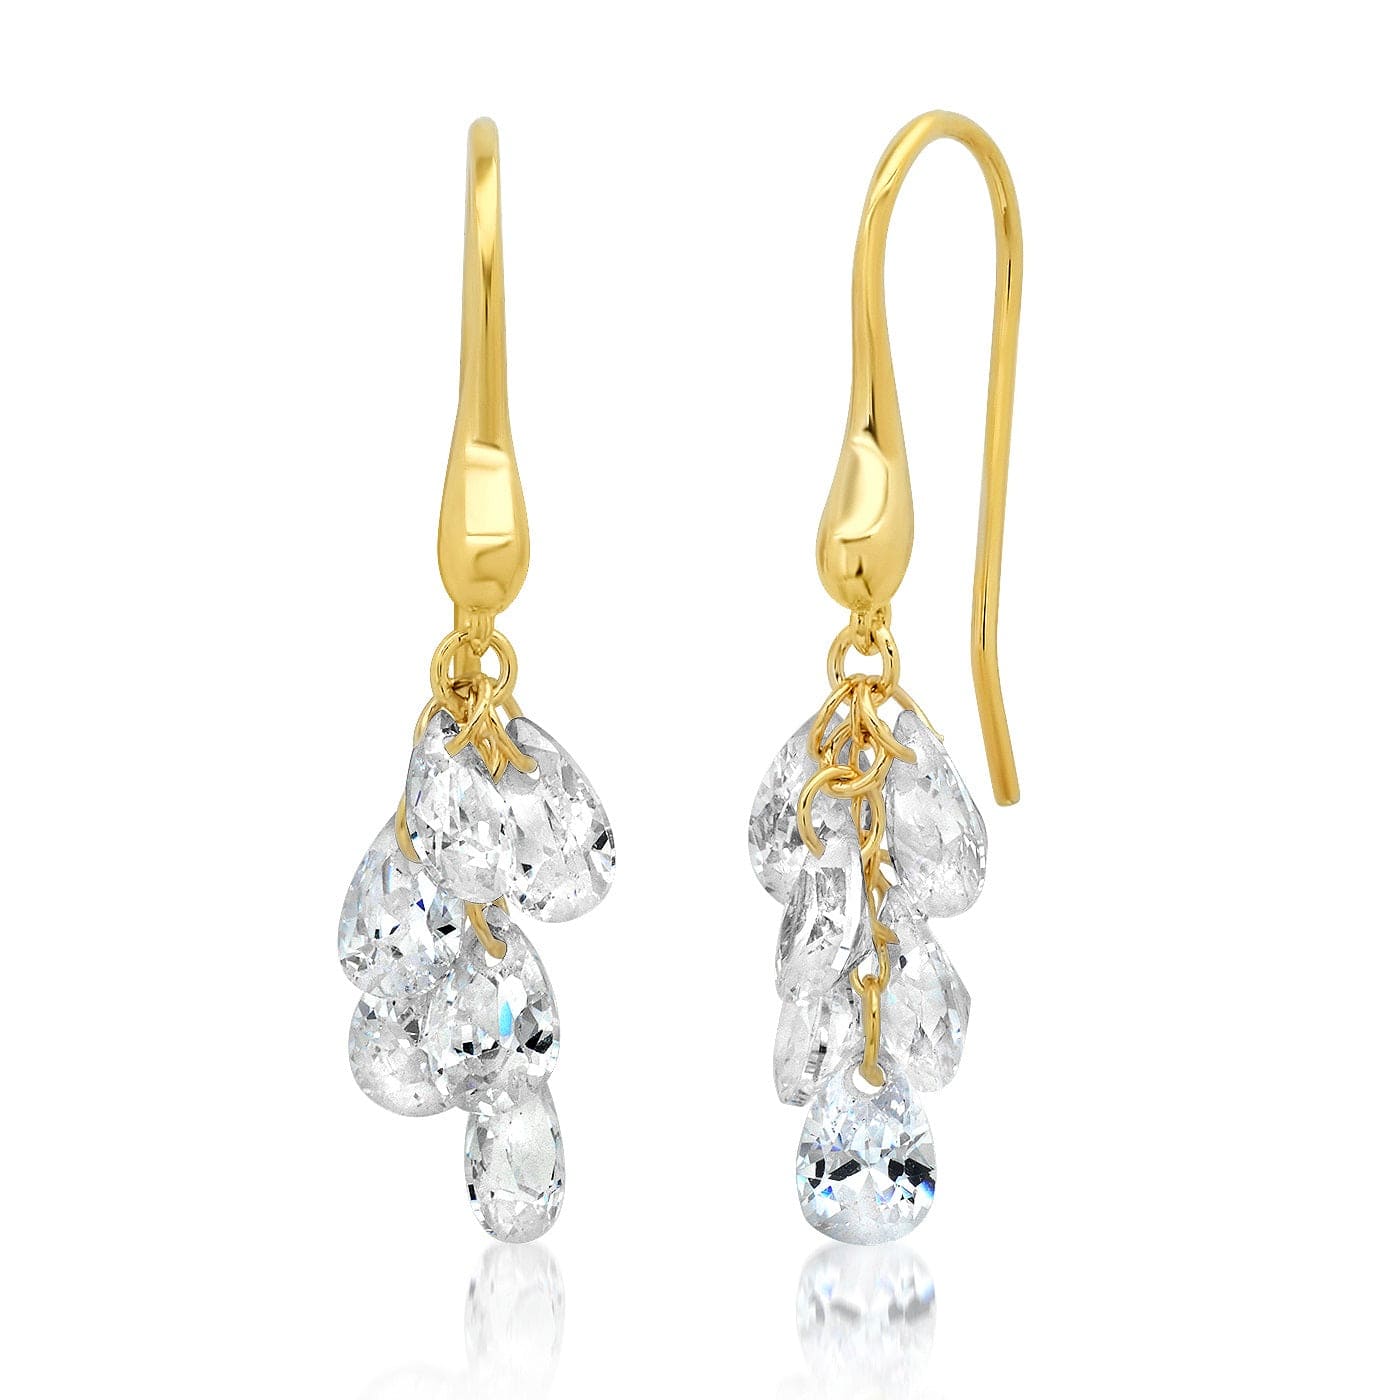 TAI JEWELRY Earrings Clustered Floating Cz Stones On A French Wire